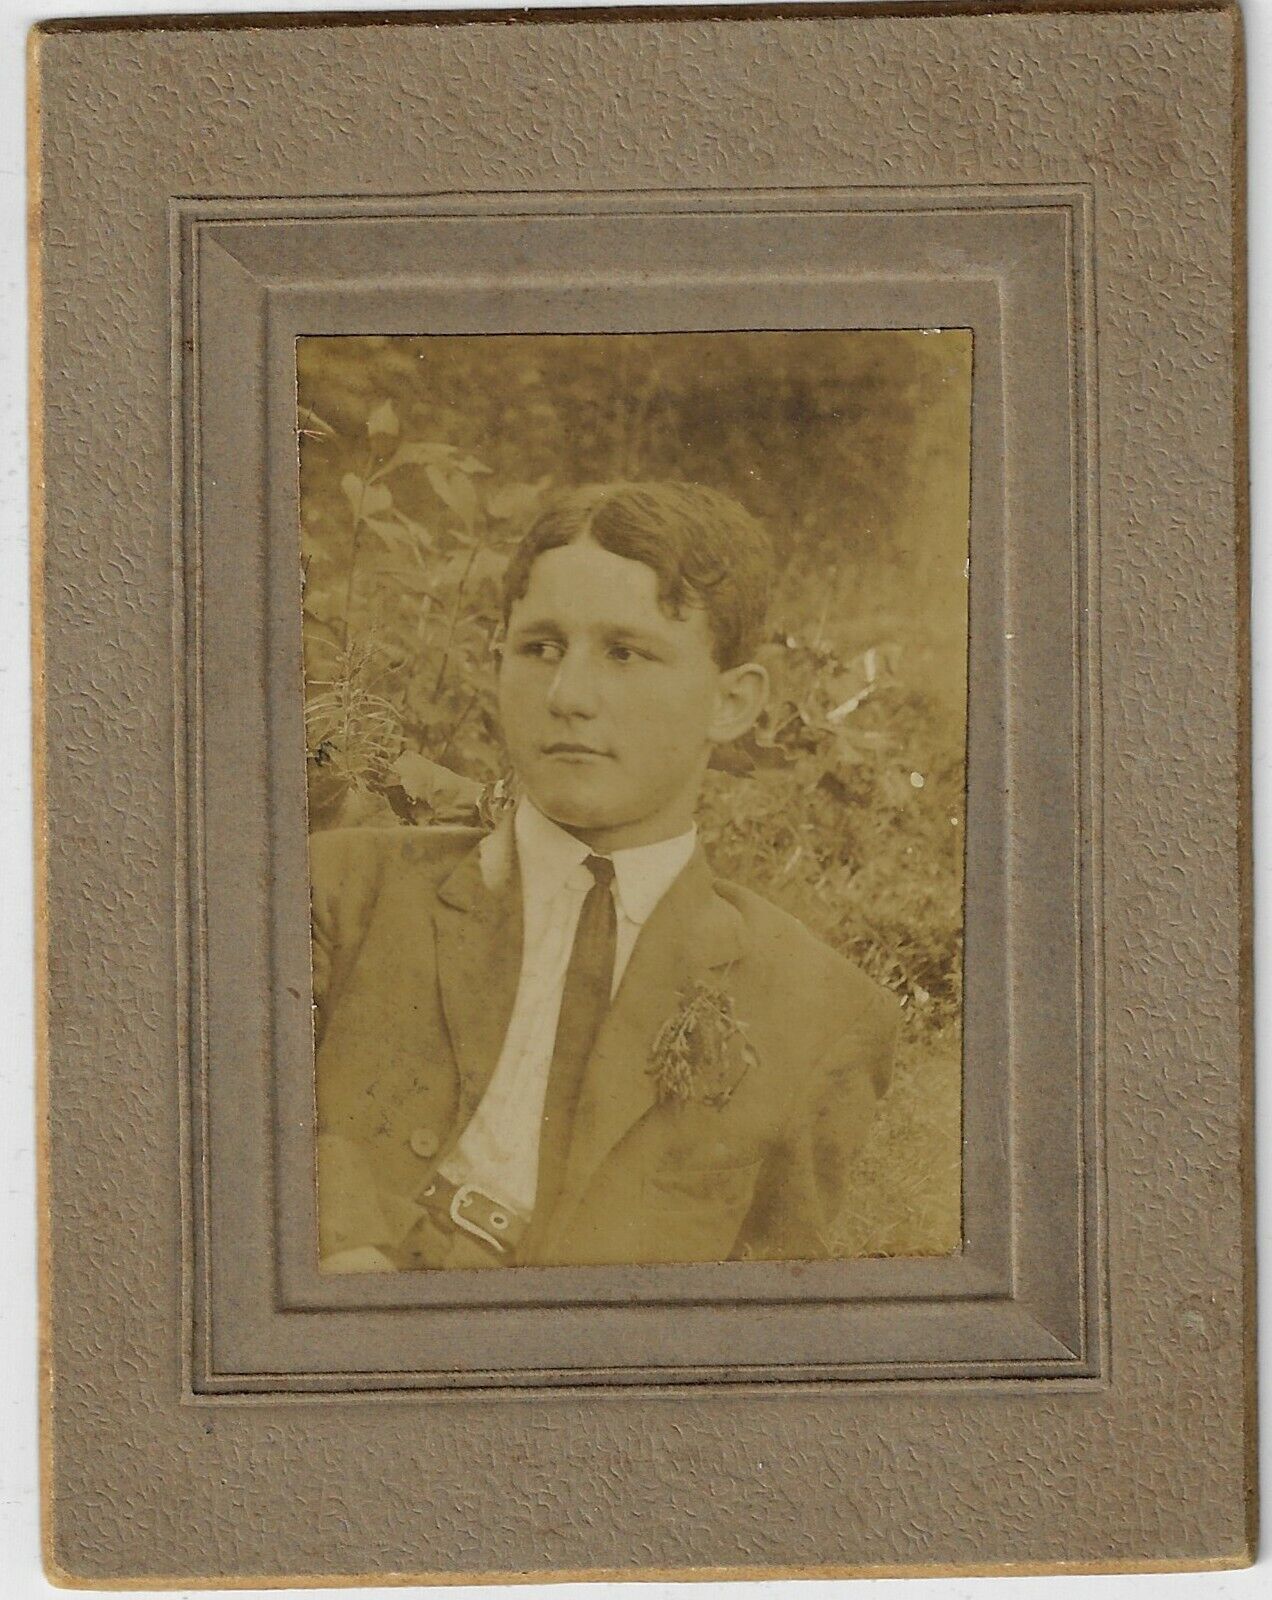 Antique Photograph late 19 century CDV mounted on heavy card stock young man